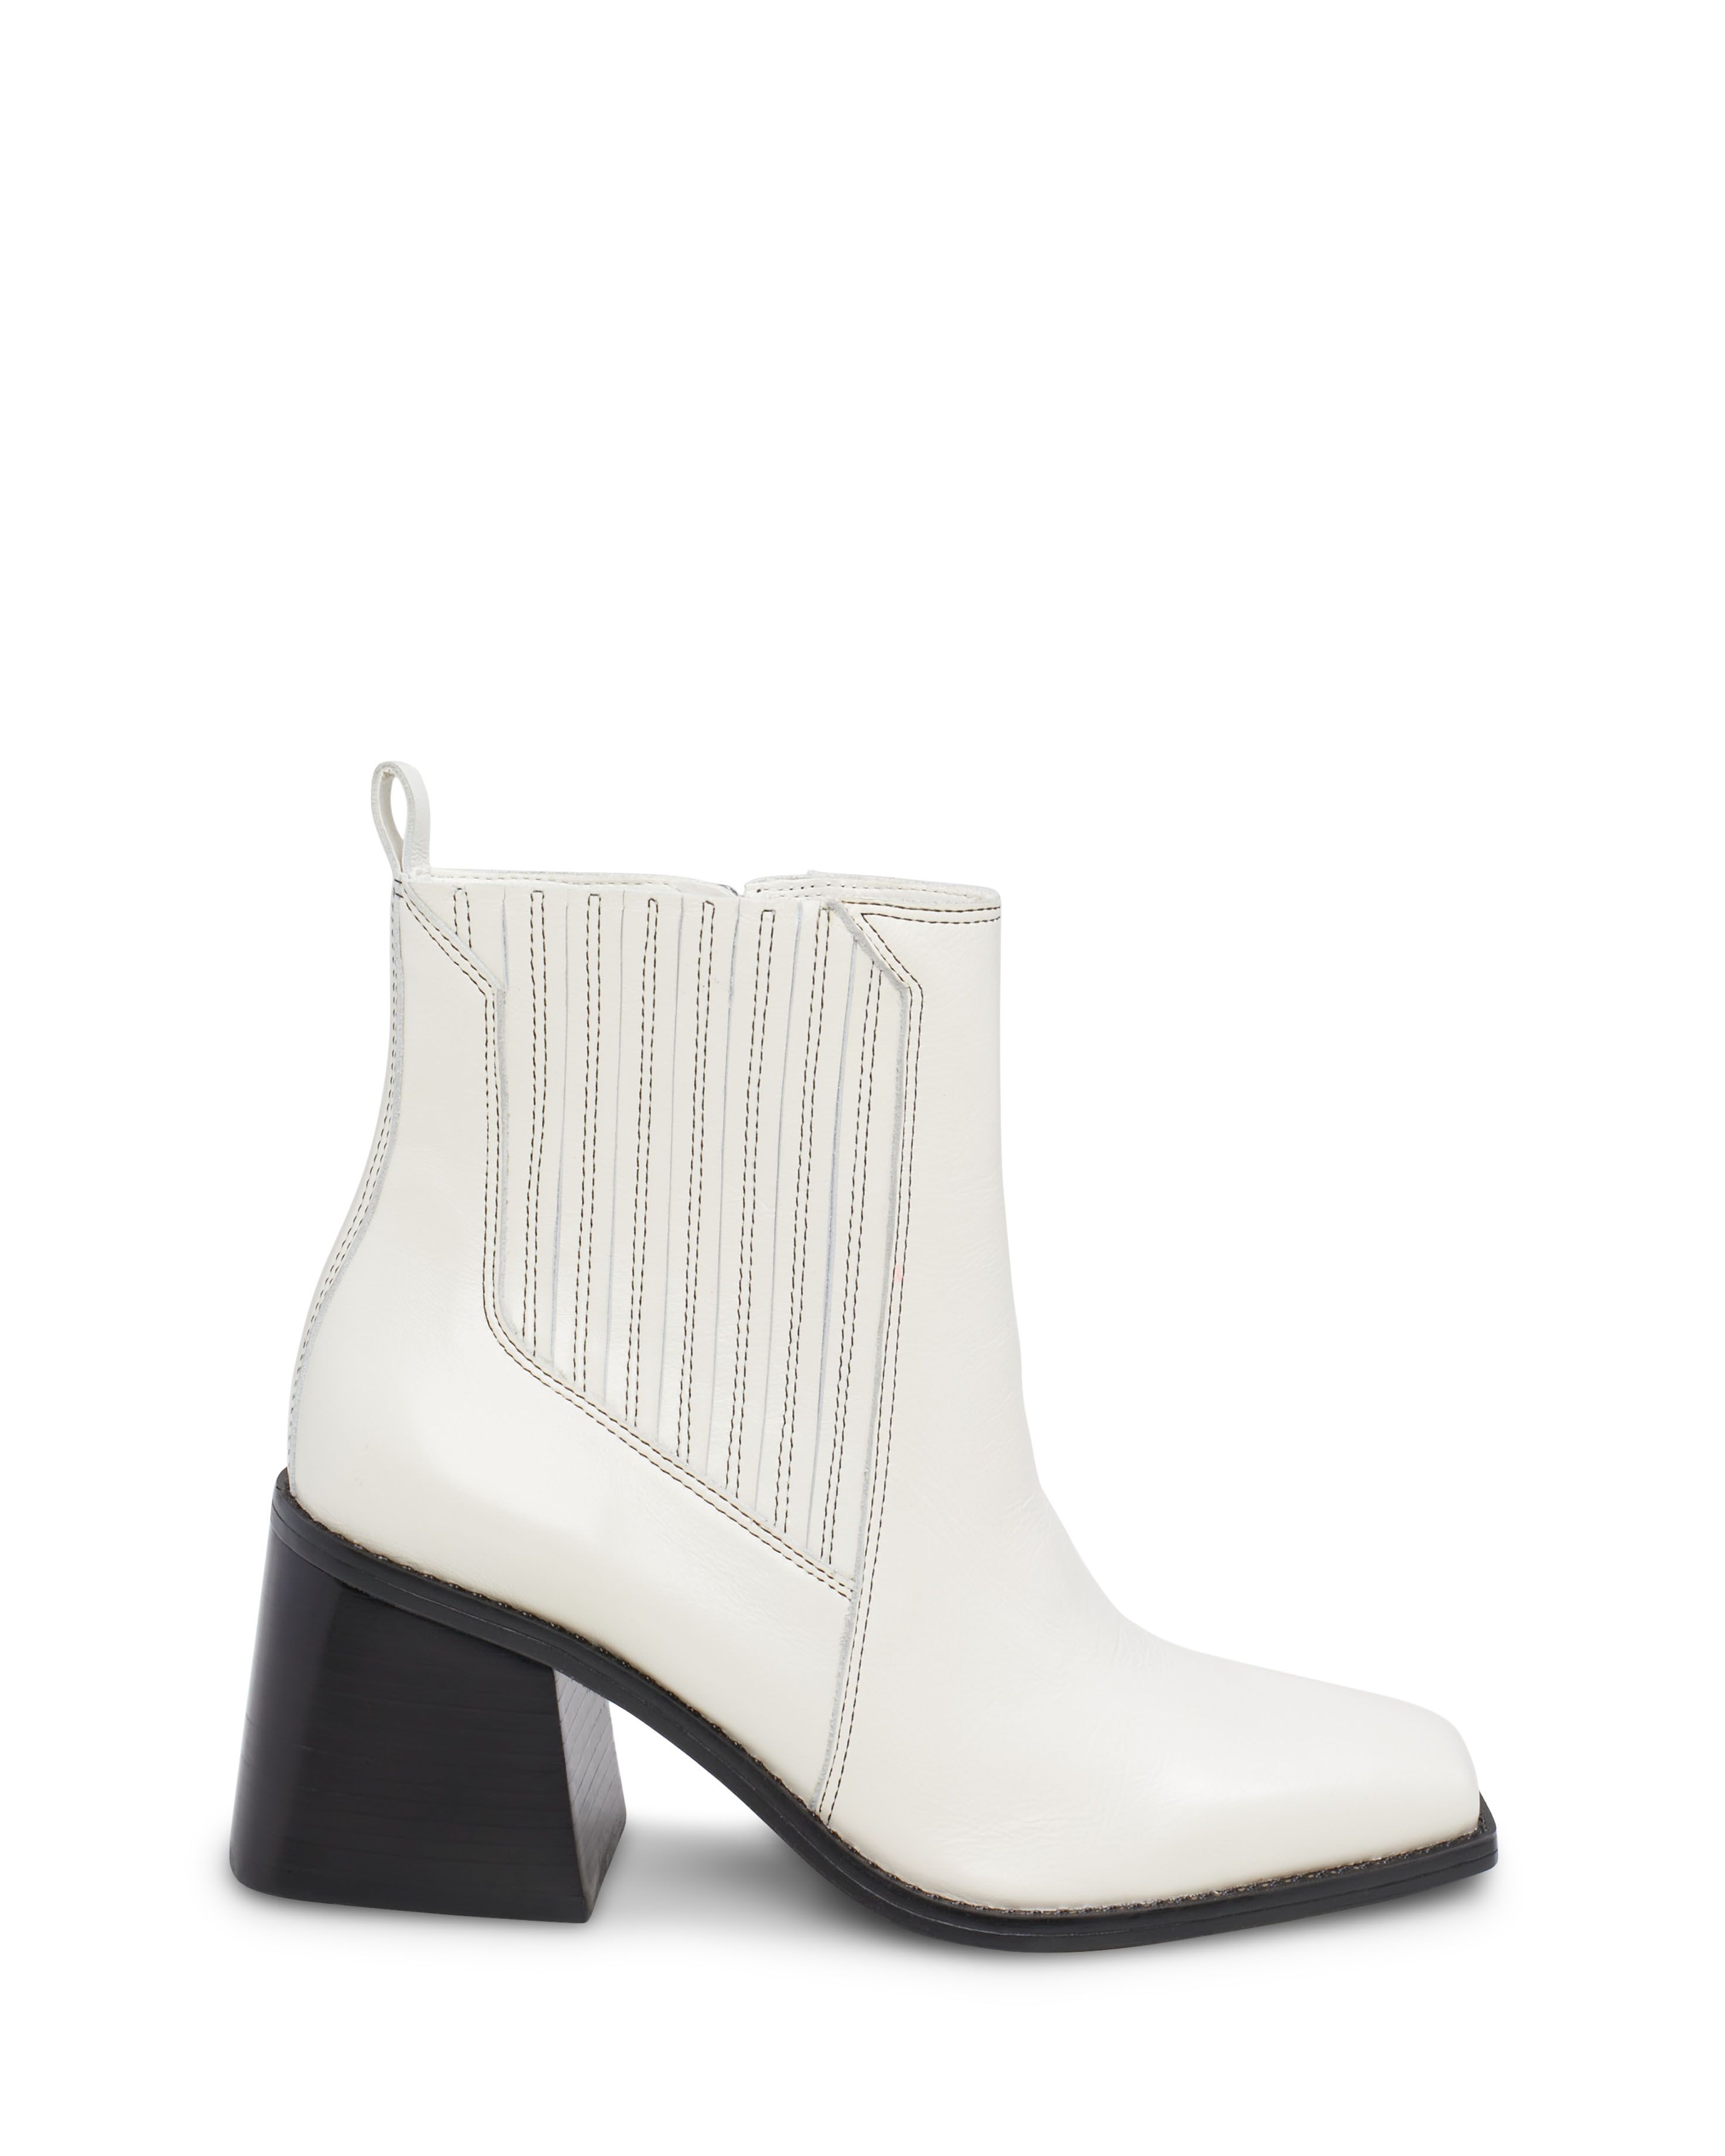 Vince Camuto Sojetta Bootie | Vince Camuto